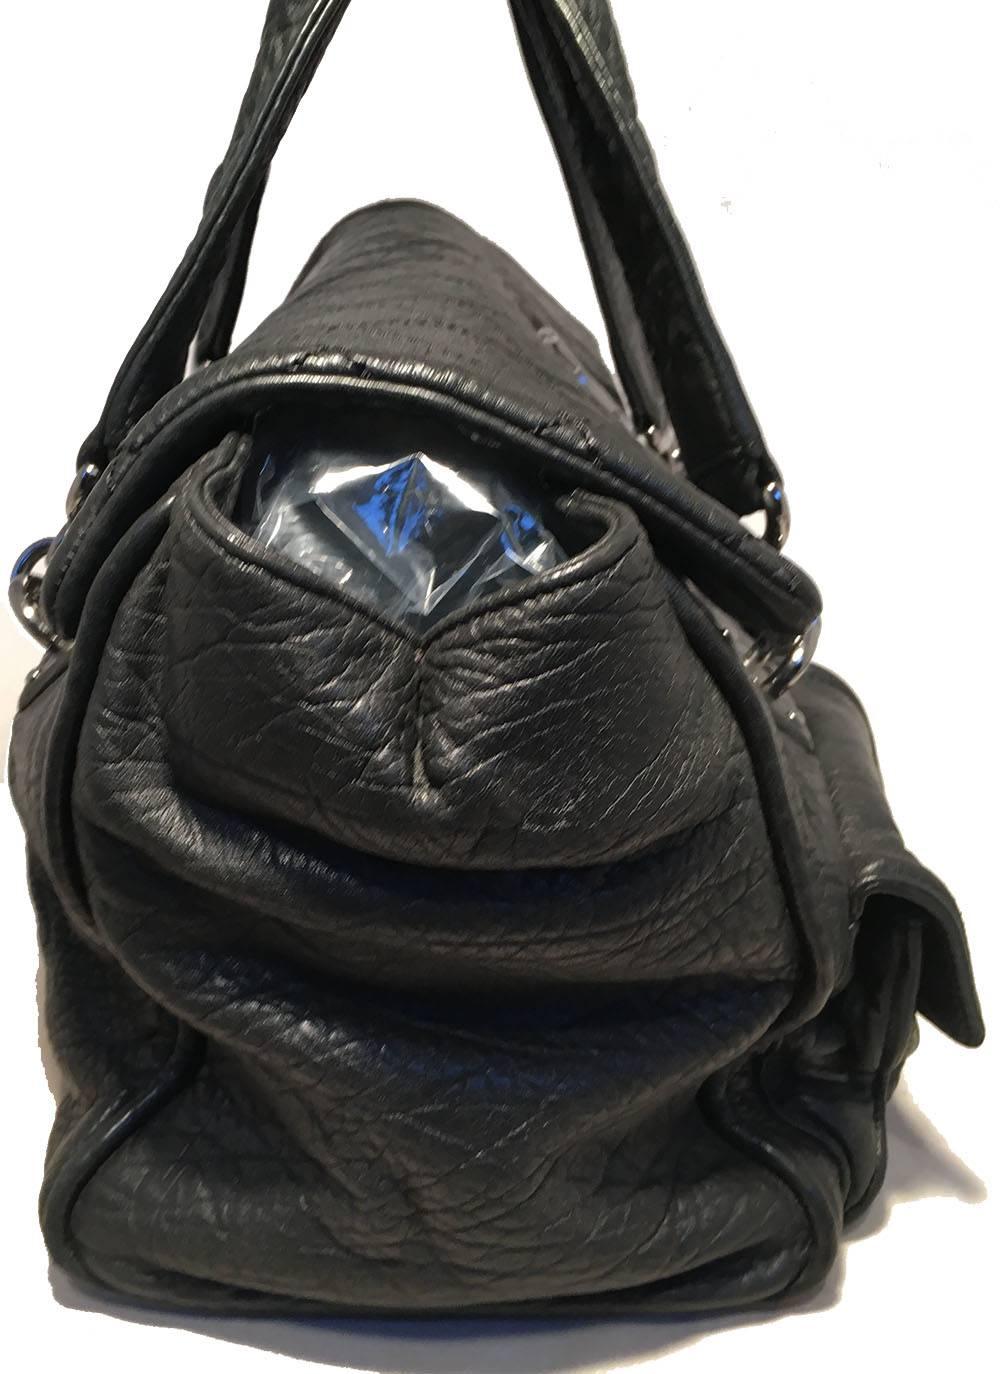 GORGEOUS Chanel Black Aged Calfskin Quilted Classic Flap Tote Bag in excellent condition. Black aged calfskin exterior trimmed with silver hardware. 2 Front exterior small flap pockets for added storage. Double padded leather handles for added